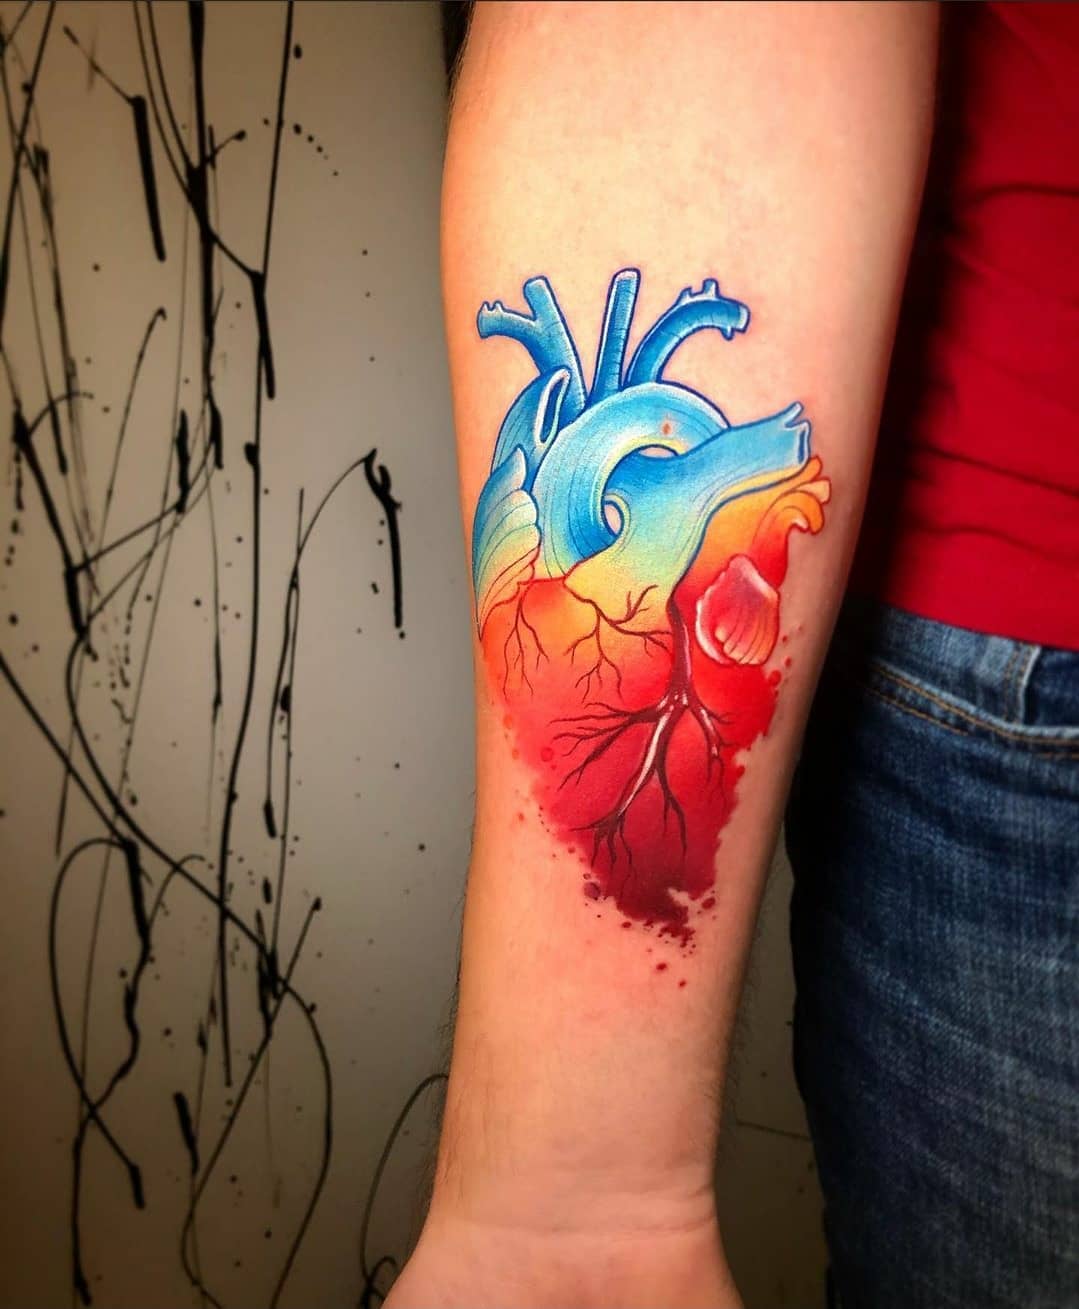 Watercolour heart by Noemi for Blairs first tattoo!
